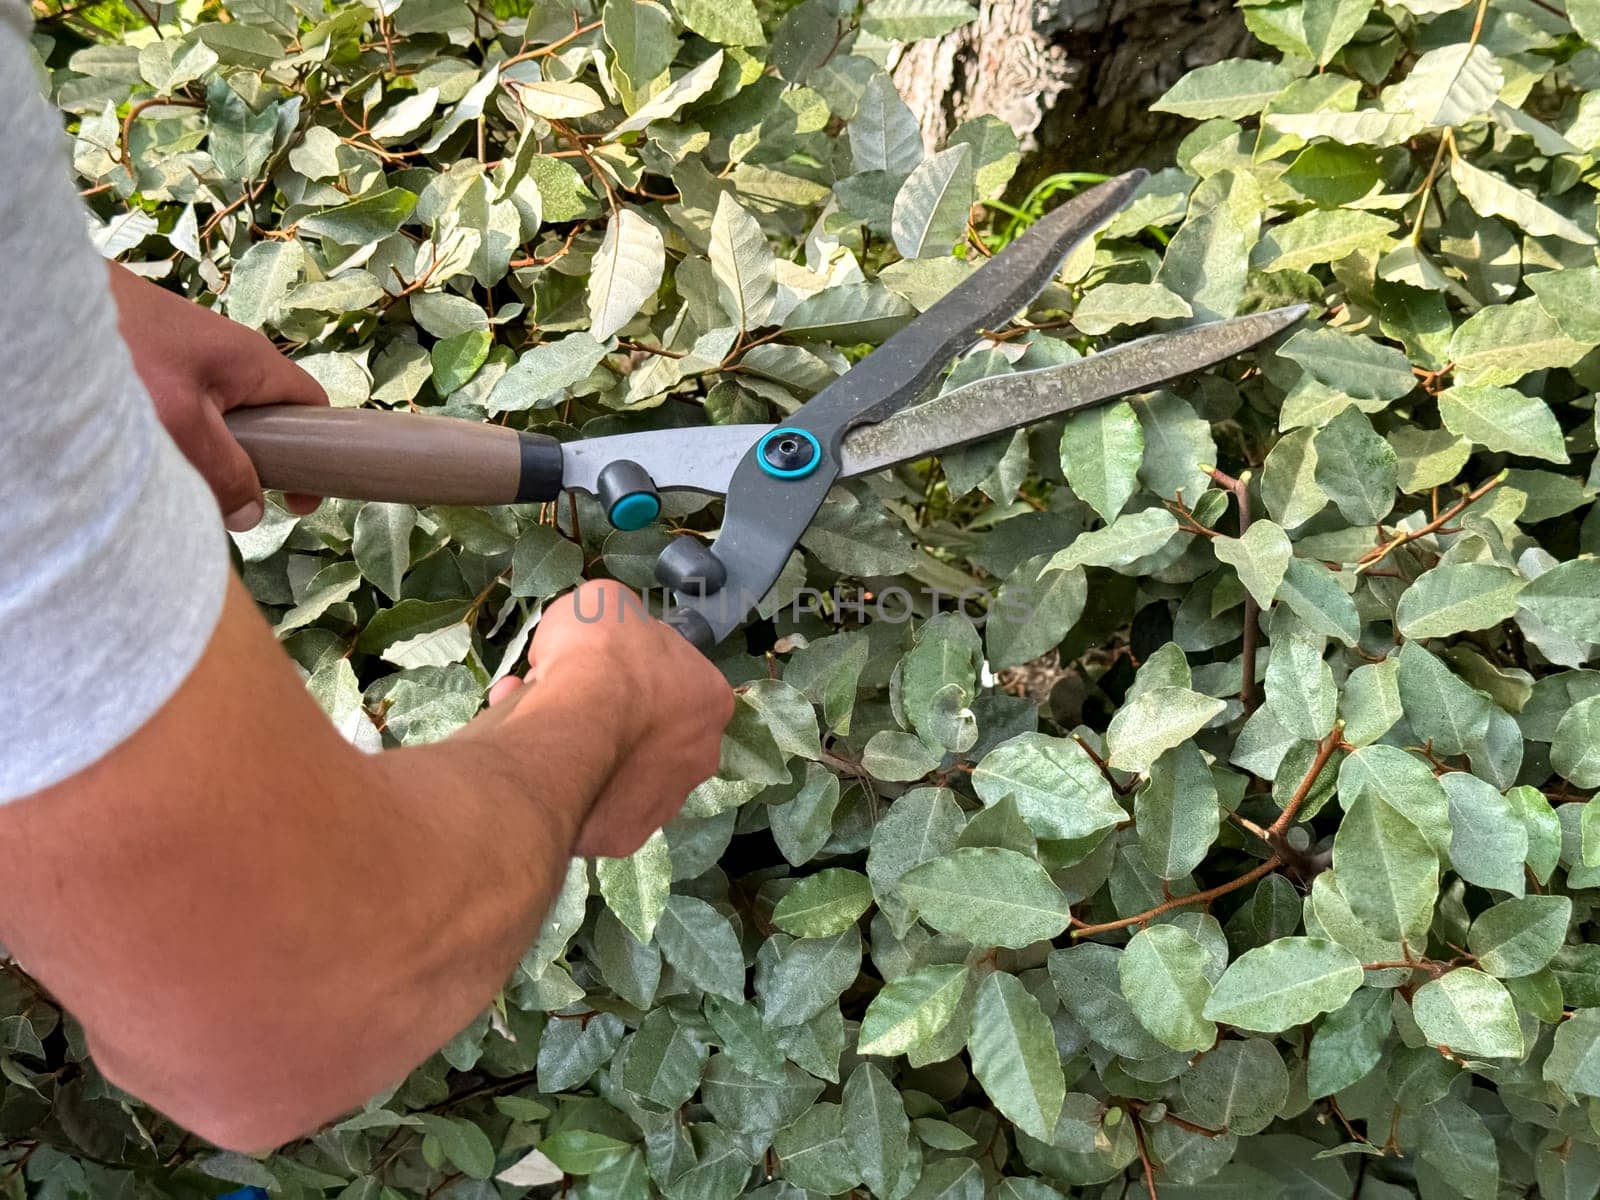 Close up of man using garden shears to trim and shape lush green ivy, focusing on plant care and landscape maintenance, outdoor gardening activity on sunny day. High quality photo